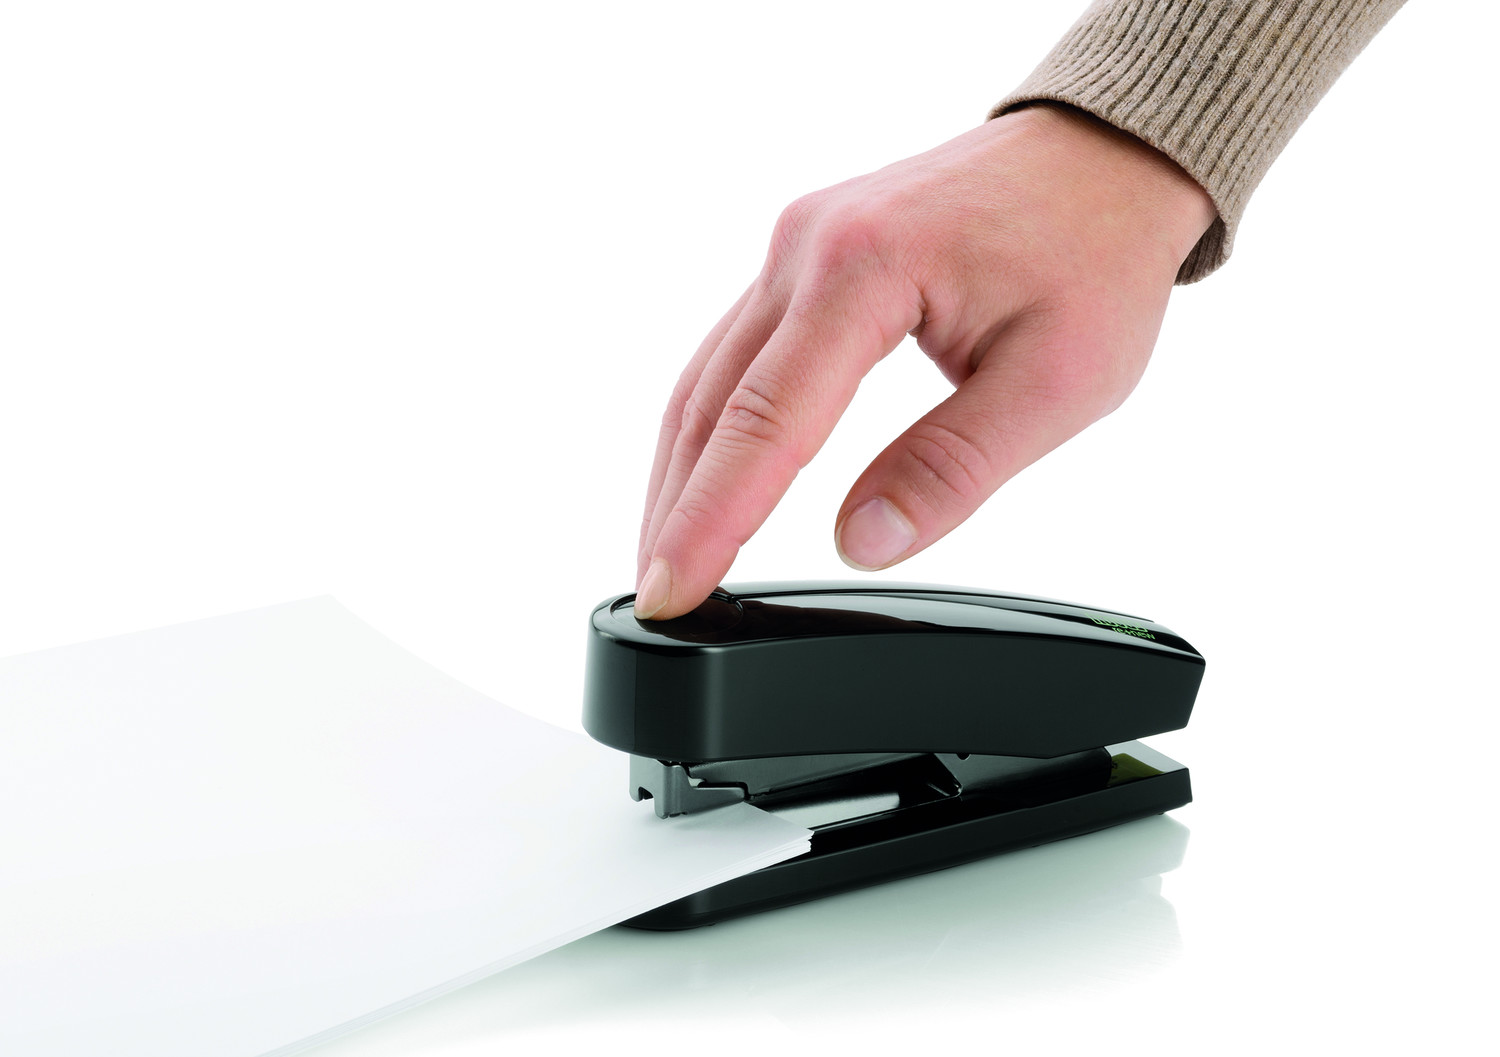 Quick and easy stapling with Novus staplers